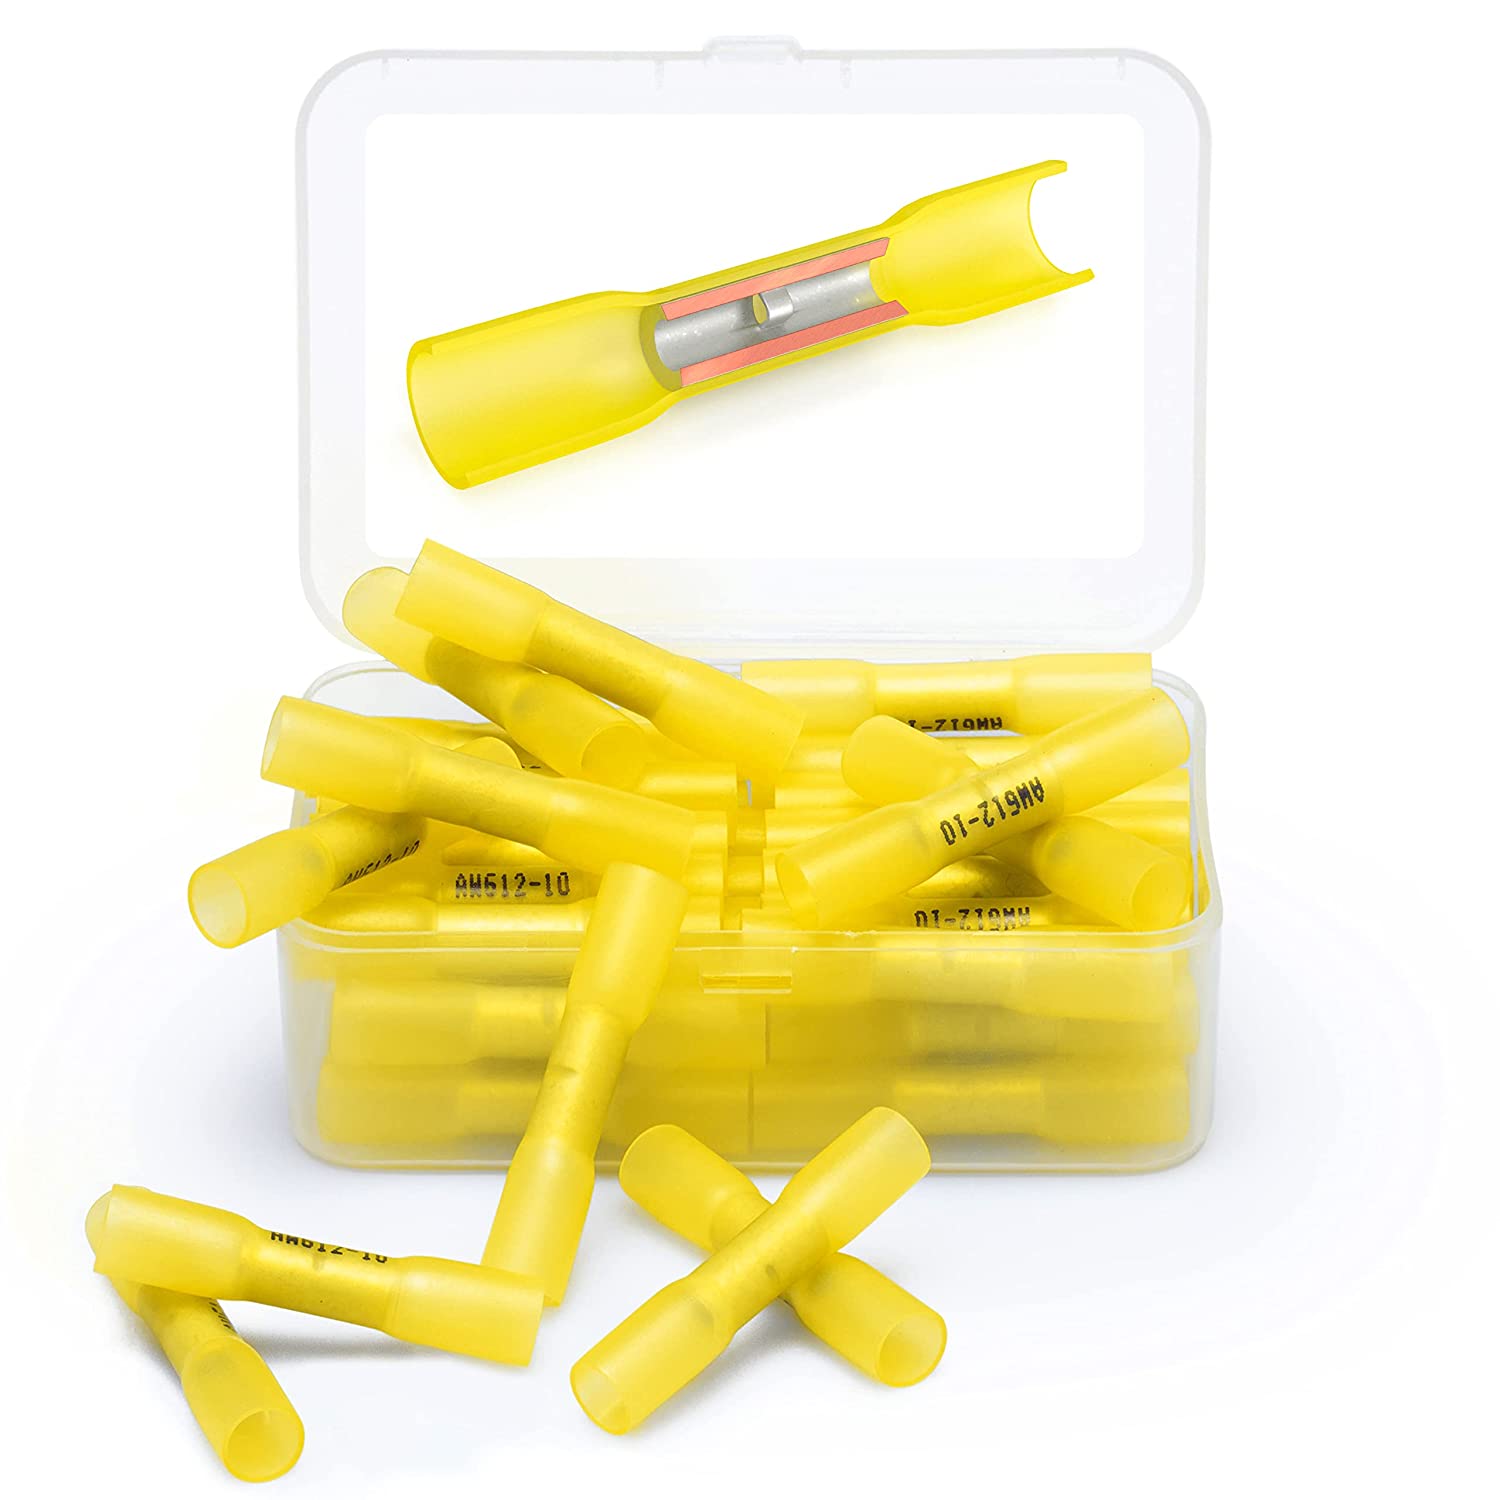 Wirefy 50 PCS Heat Shrink Butt Connectors Yellow 12-10 AWG - Marine Grade Butt Connectors - Wire Butt Splice Connectors - Electrical Waterproof Heat Shrink Butts - image 1 of 8